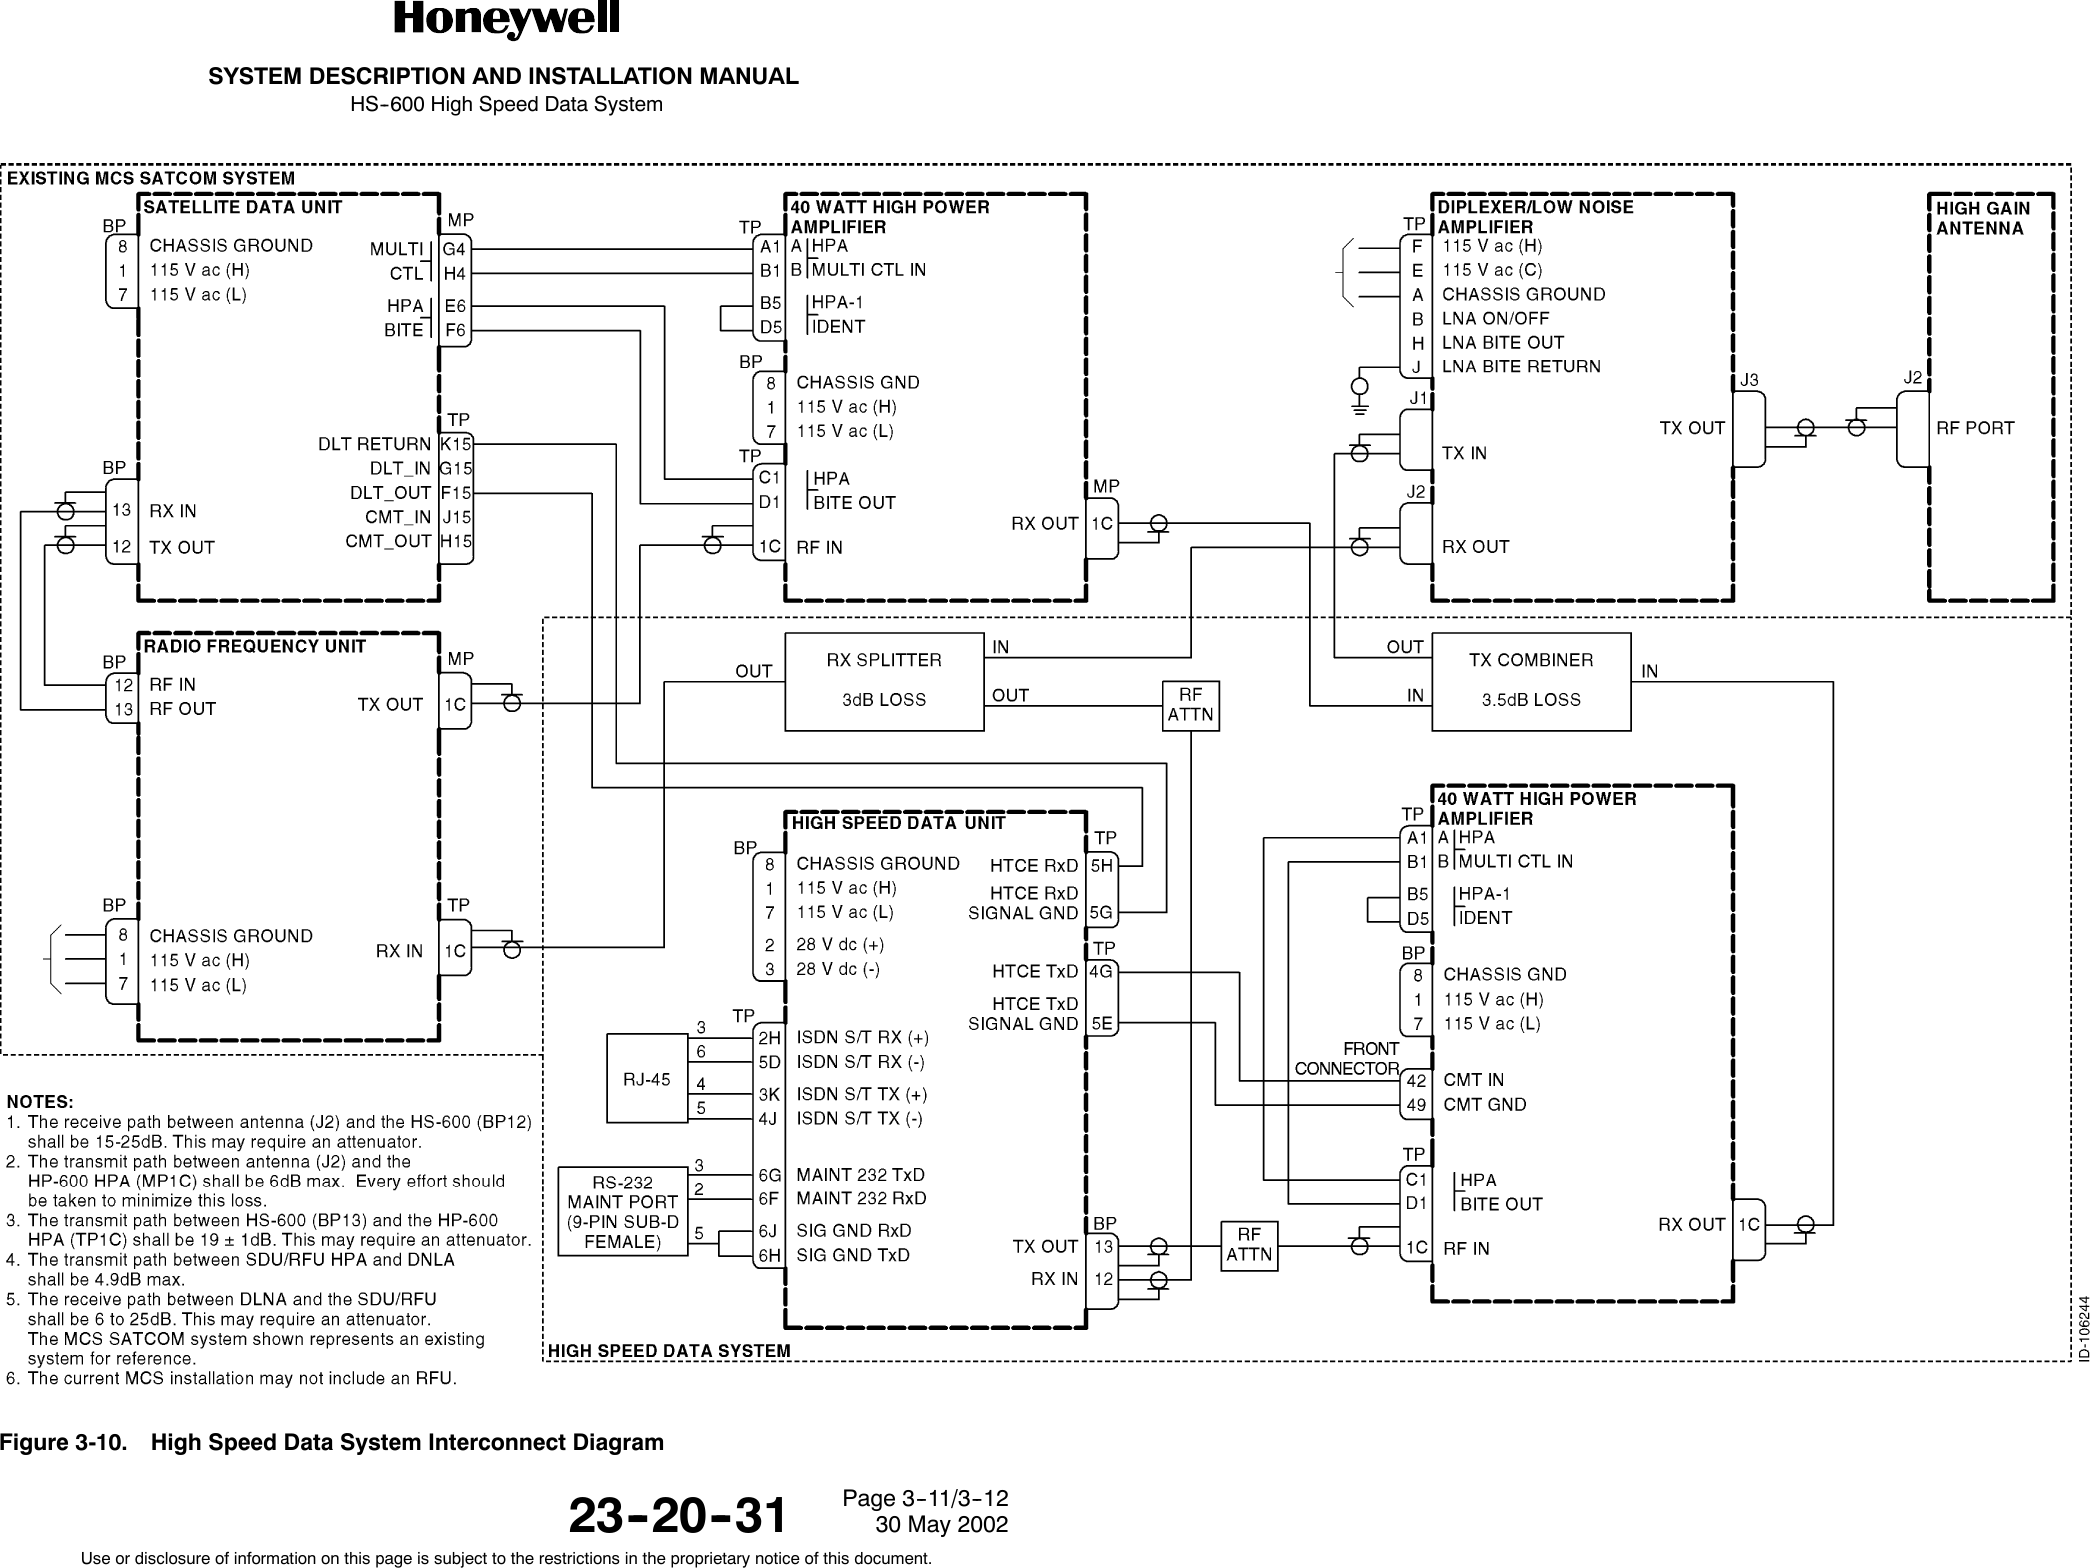 SYSTEM DESCRIPTION AND INSTALLATION MANUALHS--600 High Speed Data System23--20--3130 May 2002Use or disclosure of information on this page is subject to the restrictions in the proprietary notice of this document.Page 3--11/3--12Figure 3-10. High Speed Data System Interconnect Diagram